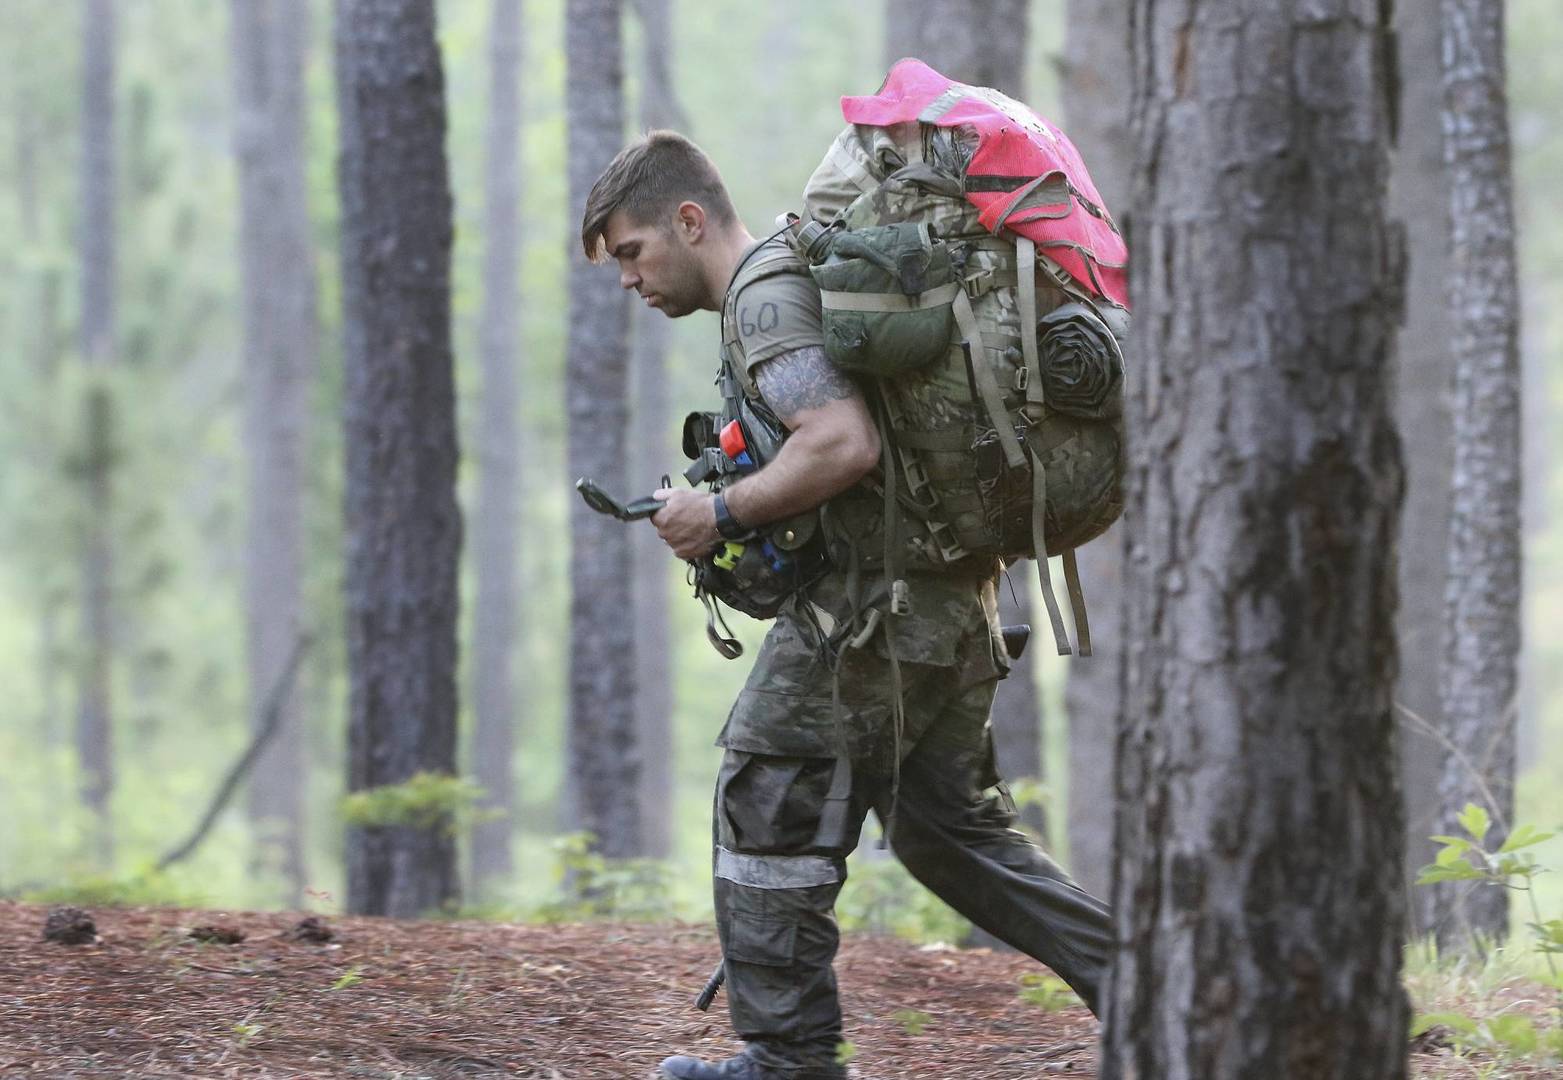 A soldier from the U.S. Army John F. Kennedy Special Warfare Center and School checks a compass while completing a land navigation course during Special Forces Assessment and Selection near Hoffman, N.C., May 7, 2019. Commanders are making big changes to the grueling course that soldiers must pass to join the elite Special Forces. The goal is to meet evolving national security threats and to shift from a culture that weeds out struggling soldiers to one that trains them to do better. (Ken Kassens/U.S. Army via AP)